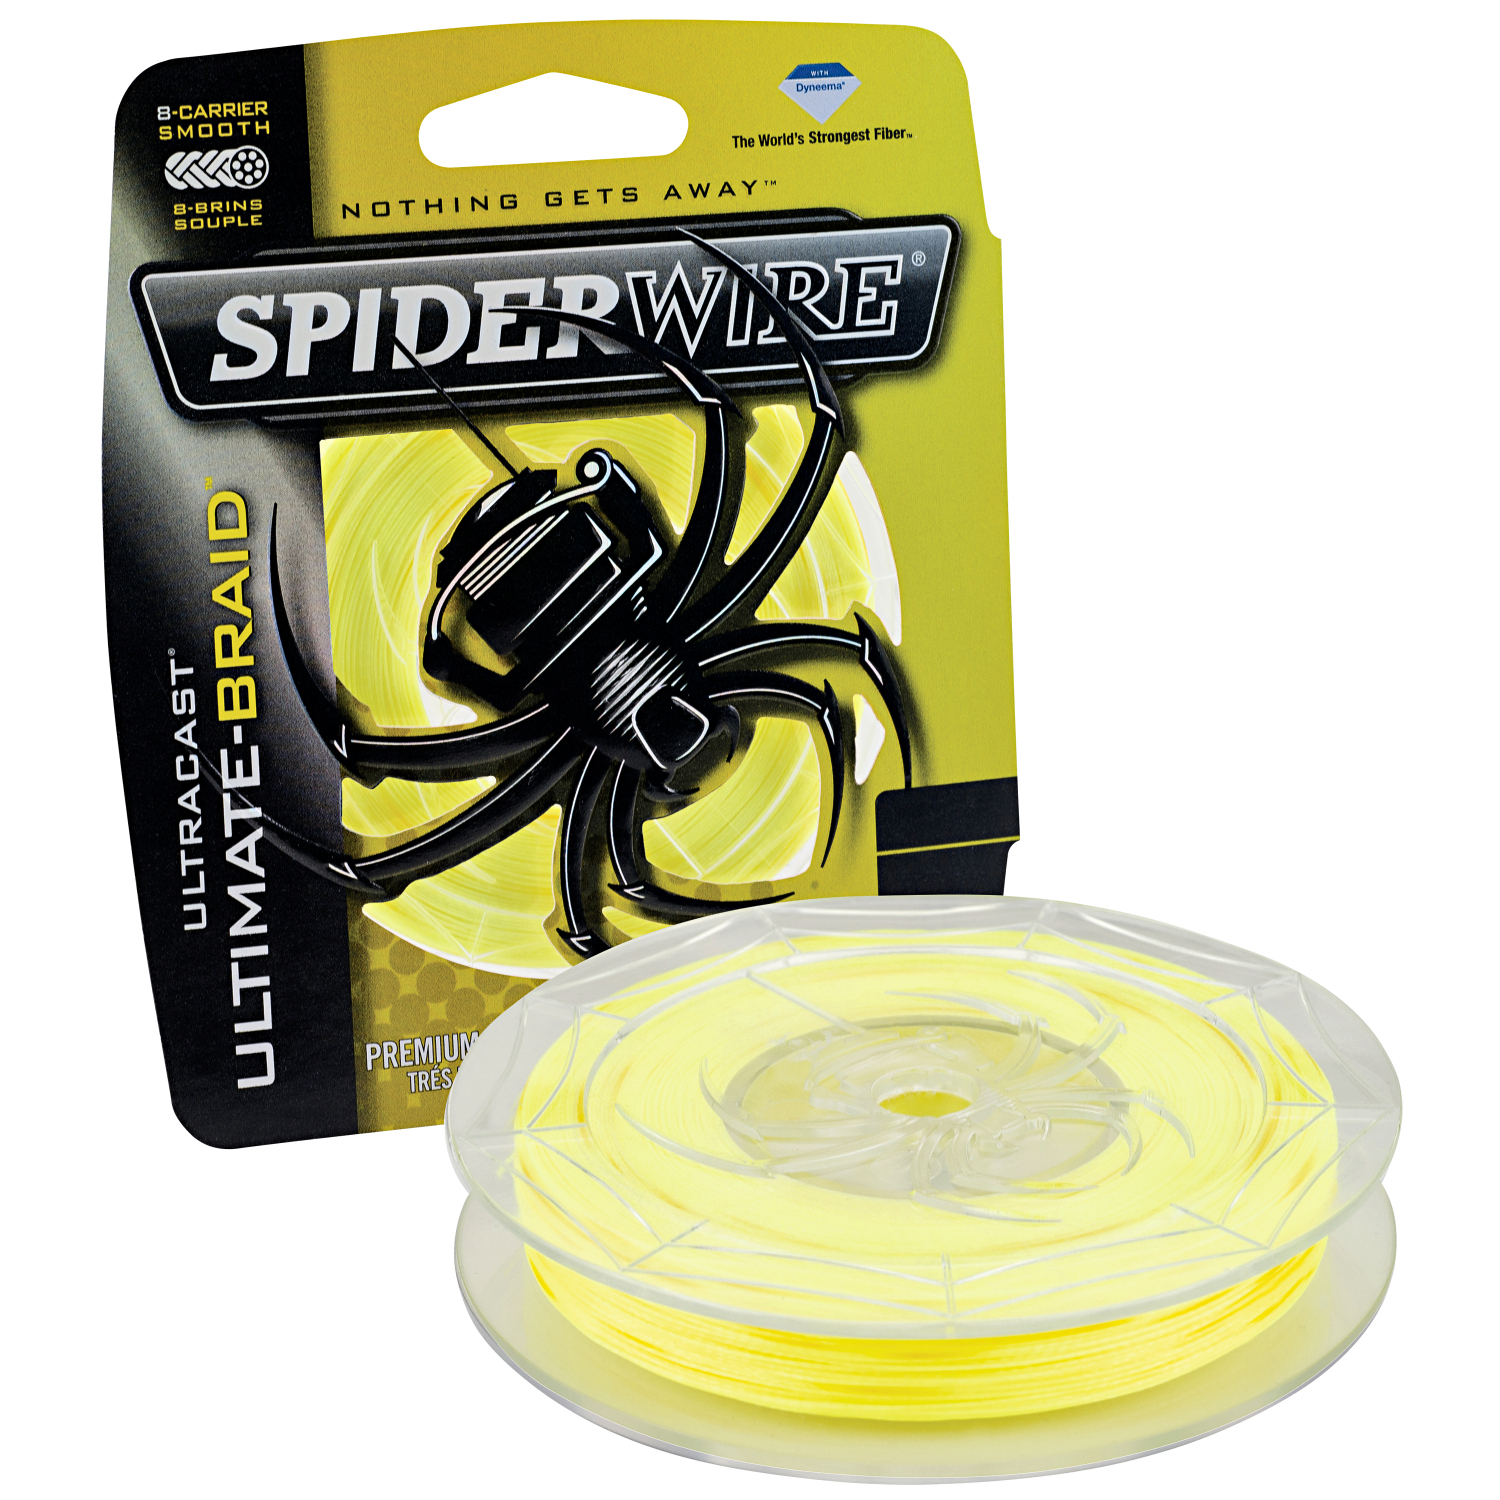 Spiderwire Fishing Line Ultracast 8 Carrier (yellow, 110 m) at low prices